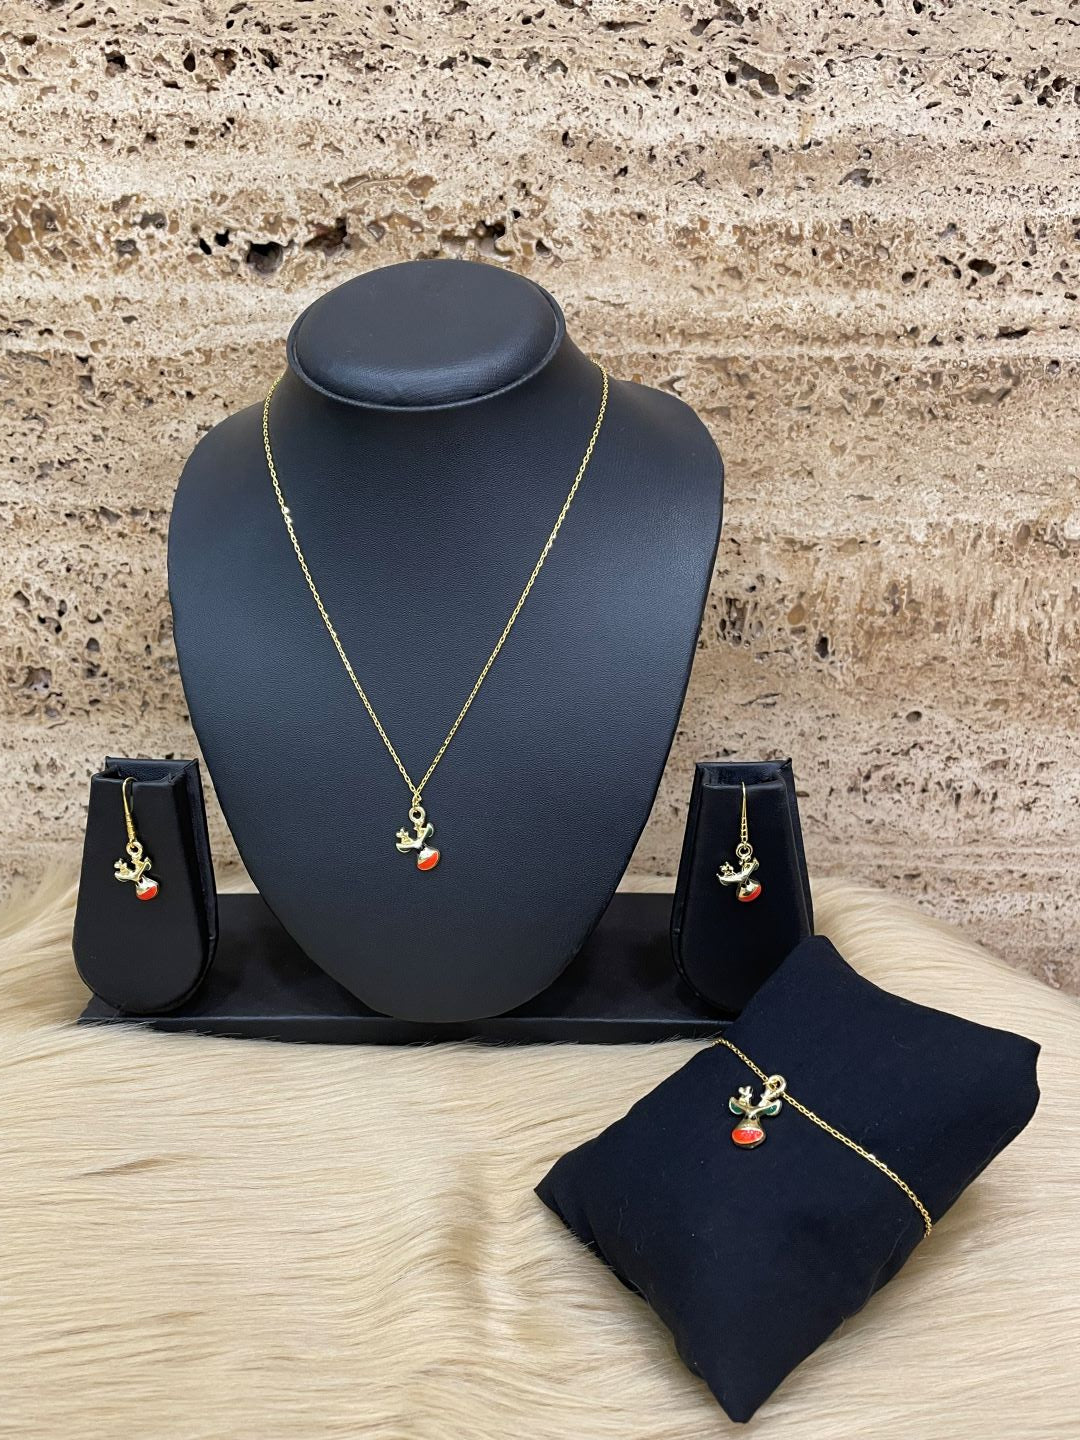 5pcs/set Lovely And Stylish White Daisy Jewelry Set With Oil Drop Design,  Including 2 Necklaces, 1 Bracelet, 1 Pair Of Earrings, And 1 Ring, Great As  Festival Gifts | SHEIN